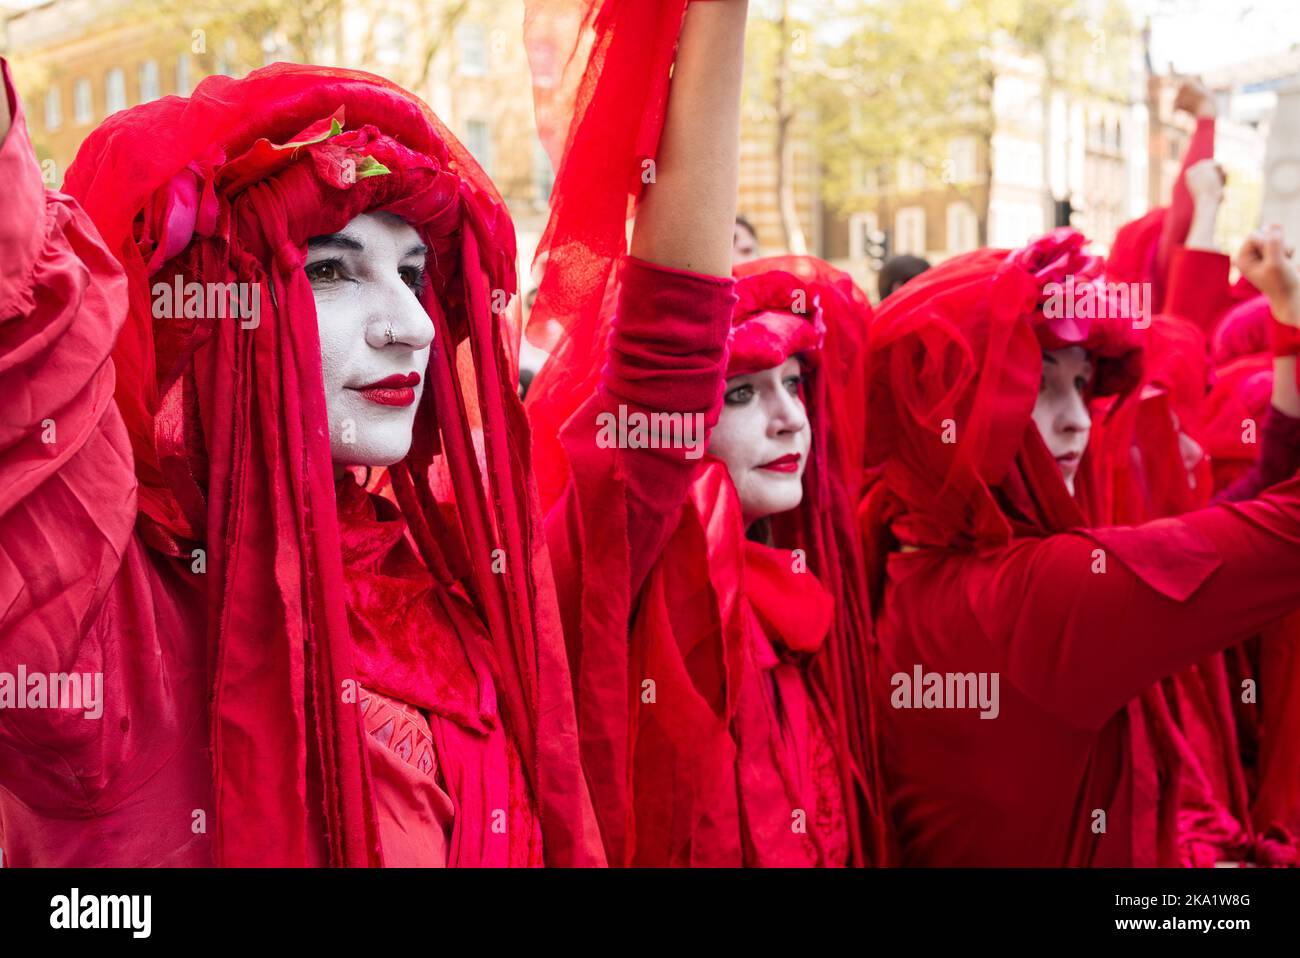 London, UK. April 21, 2019. Red robed protesters with white painted face stage a performance art protest in support of Climate Extinction in Whitehall Stock Photo